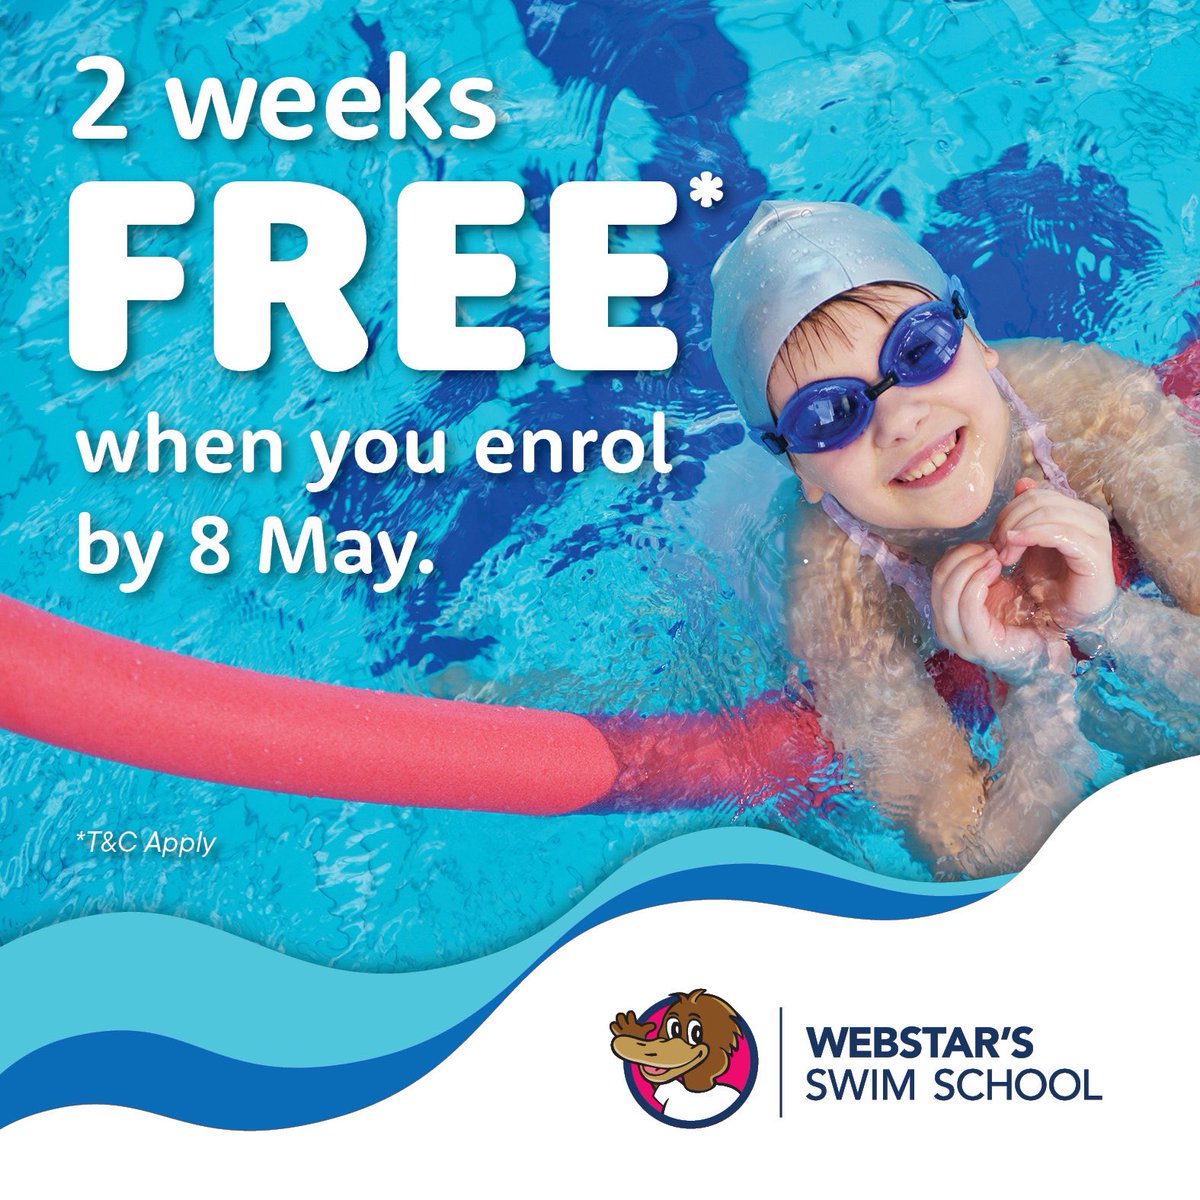 Just one day remains to take up this terrific offer. Learn lessons for life and receive two weeks FREE* when you join as a new Webstar's Swim School member by 8 May. Join online here 👉 ow.ly/7n0C50RhLSi   *T&Cs apply